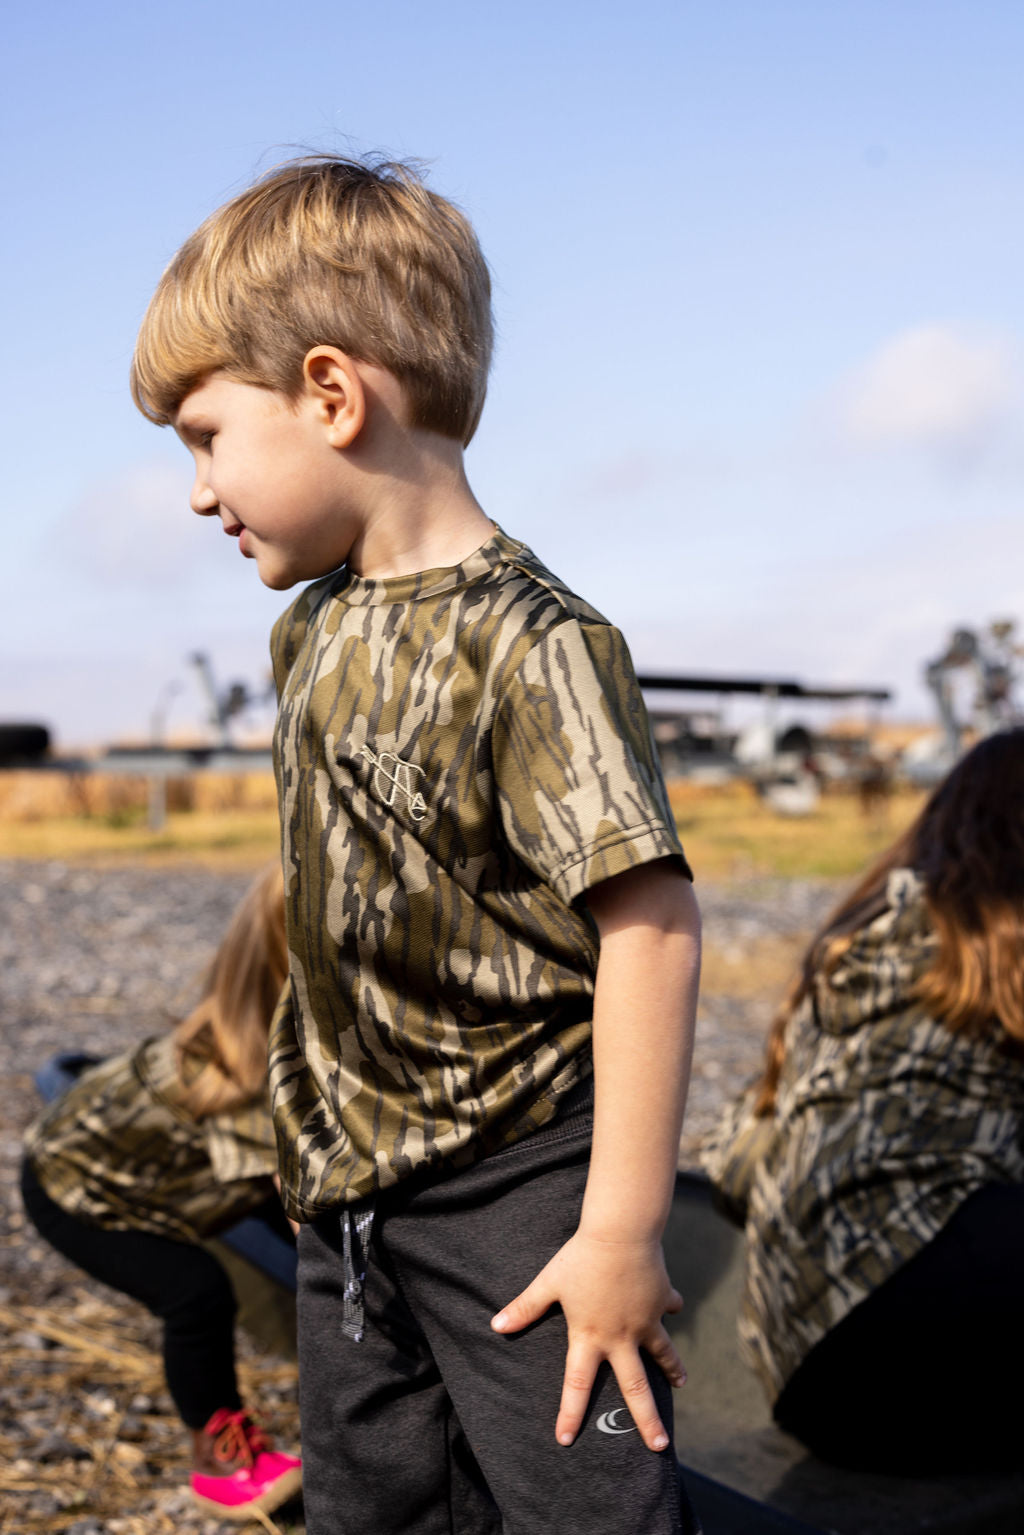 Toddler Crew Neck Short Sleeve Shirt by Bow and Arrow Outdoors - Sportsman Gear